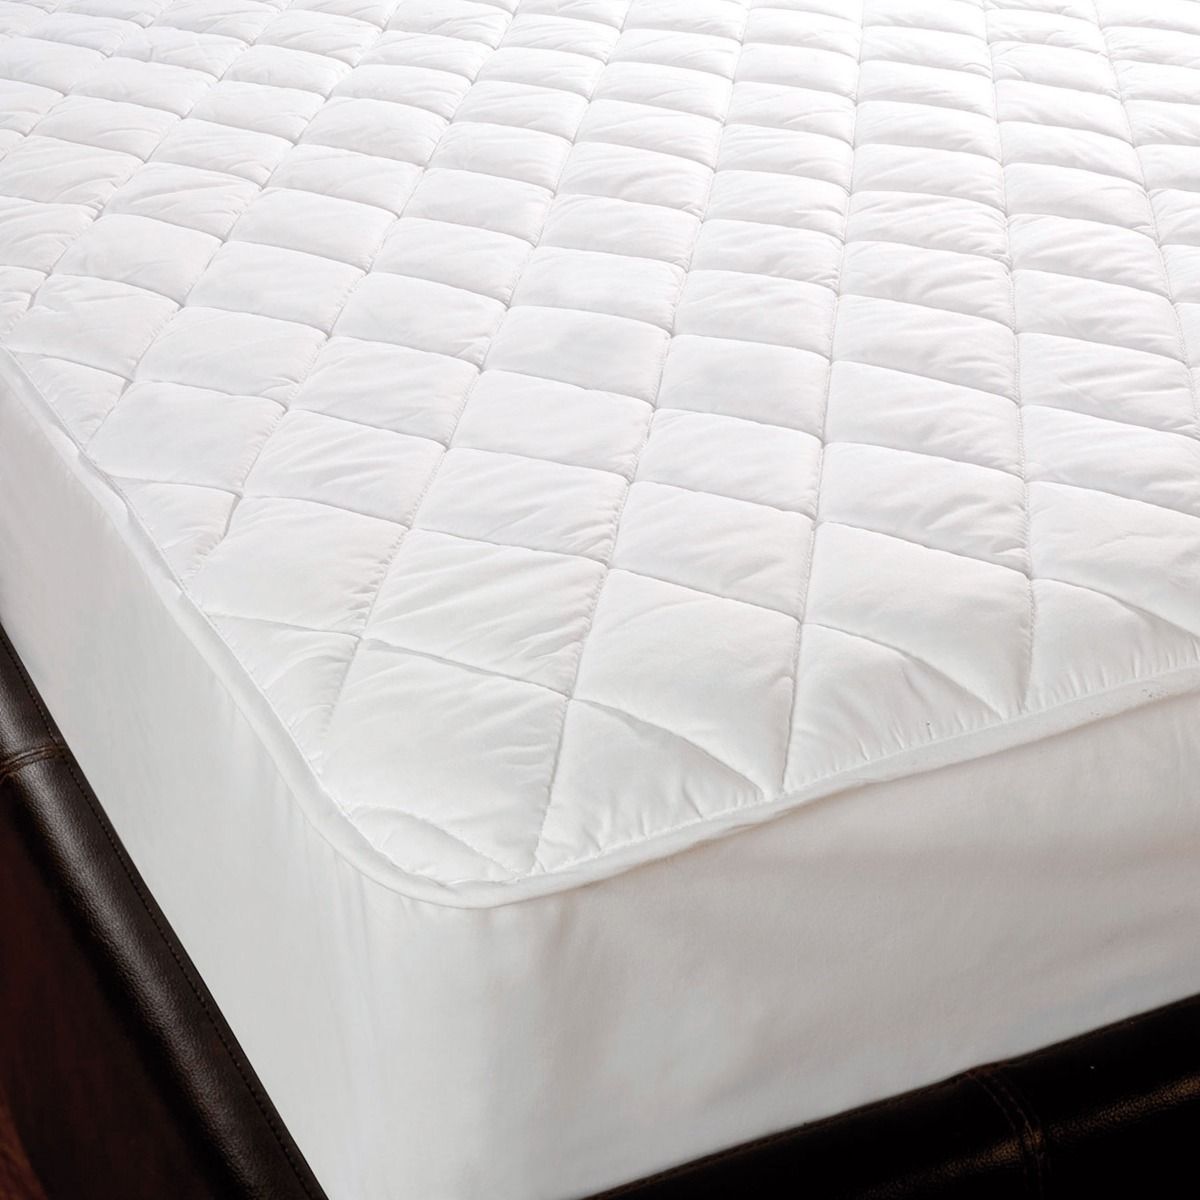 Luxury Terry Mattress Protector Diamond Fitted Sheet Non Waterproof Bed Cover 